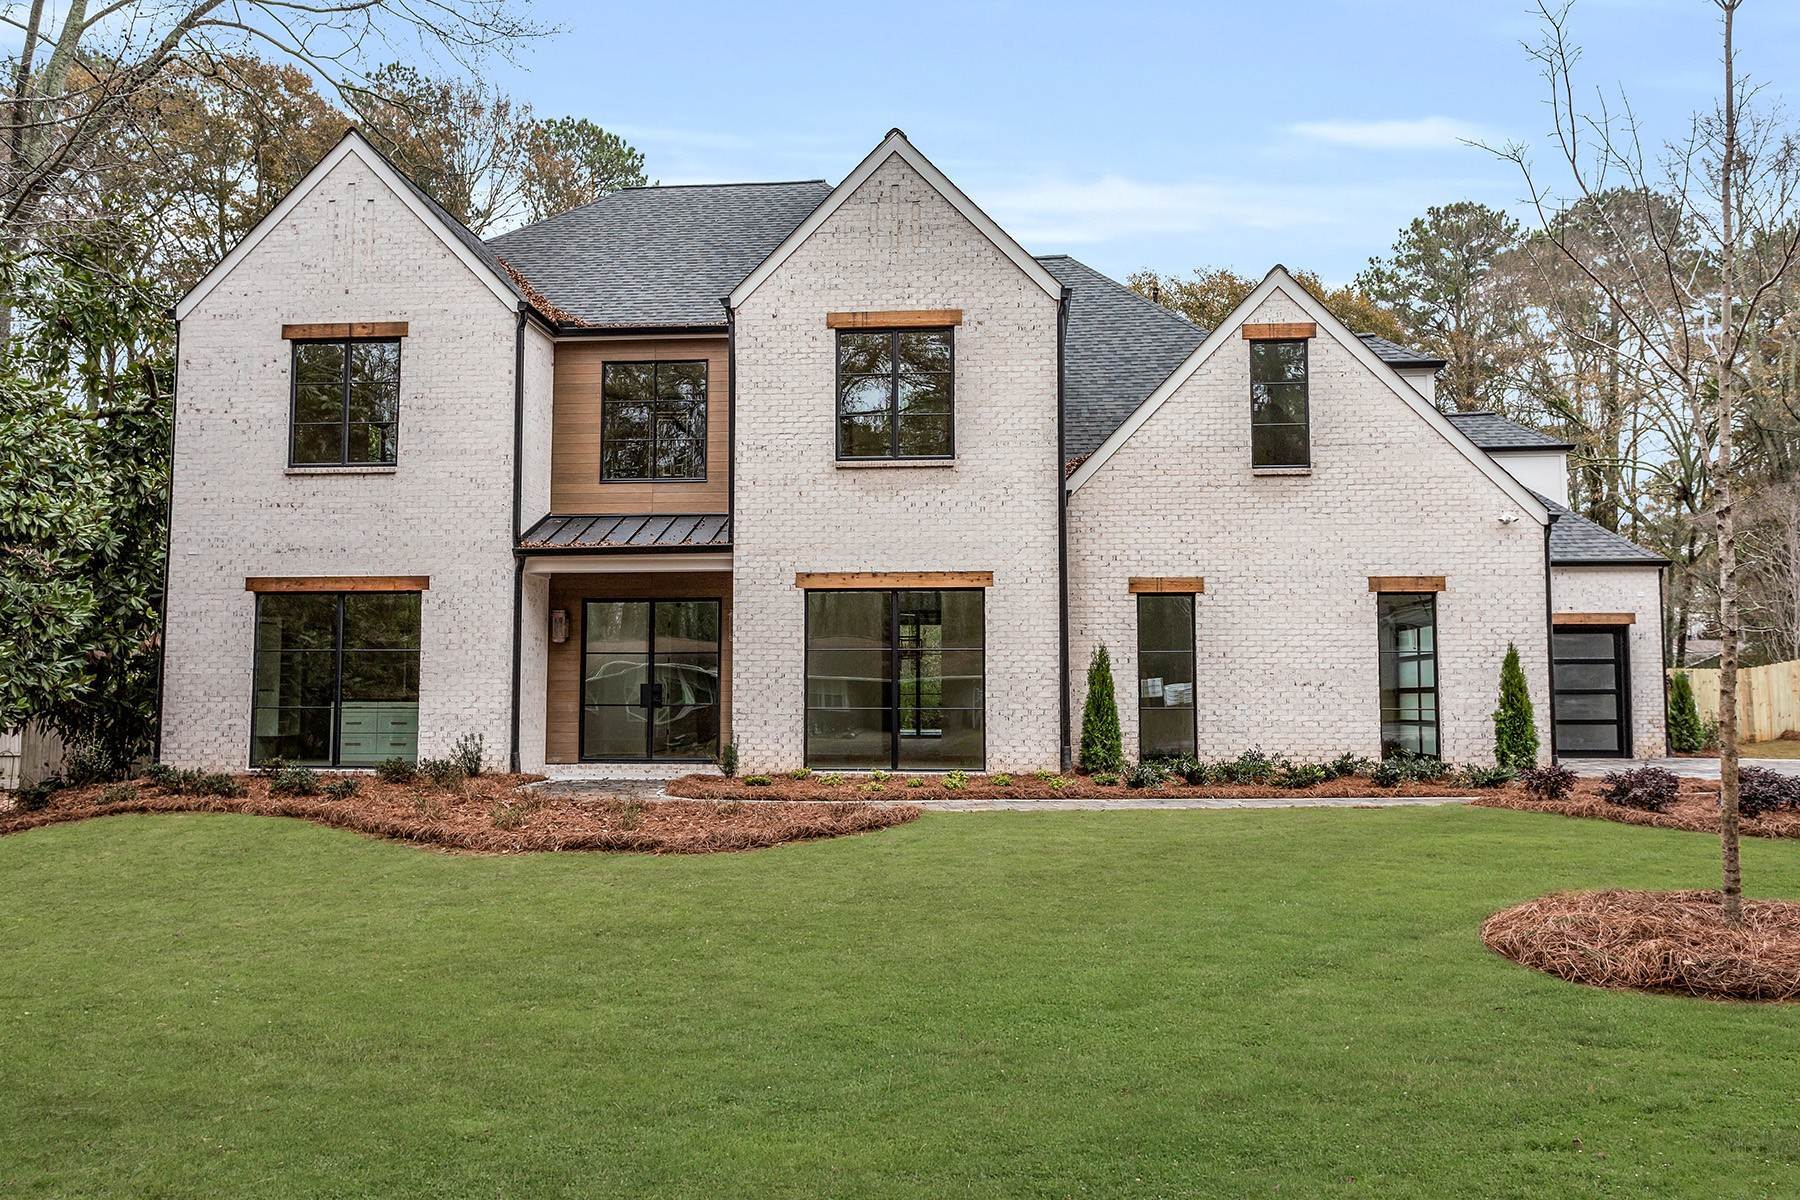 Single Family Homes for Sale at Stunning Custom New Construction with Pool in Downtown Alpharetta 215 Pinetree Circle Alpharetta, Georgia 30009 United States